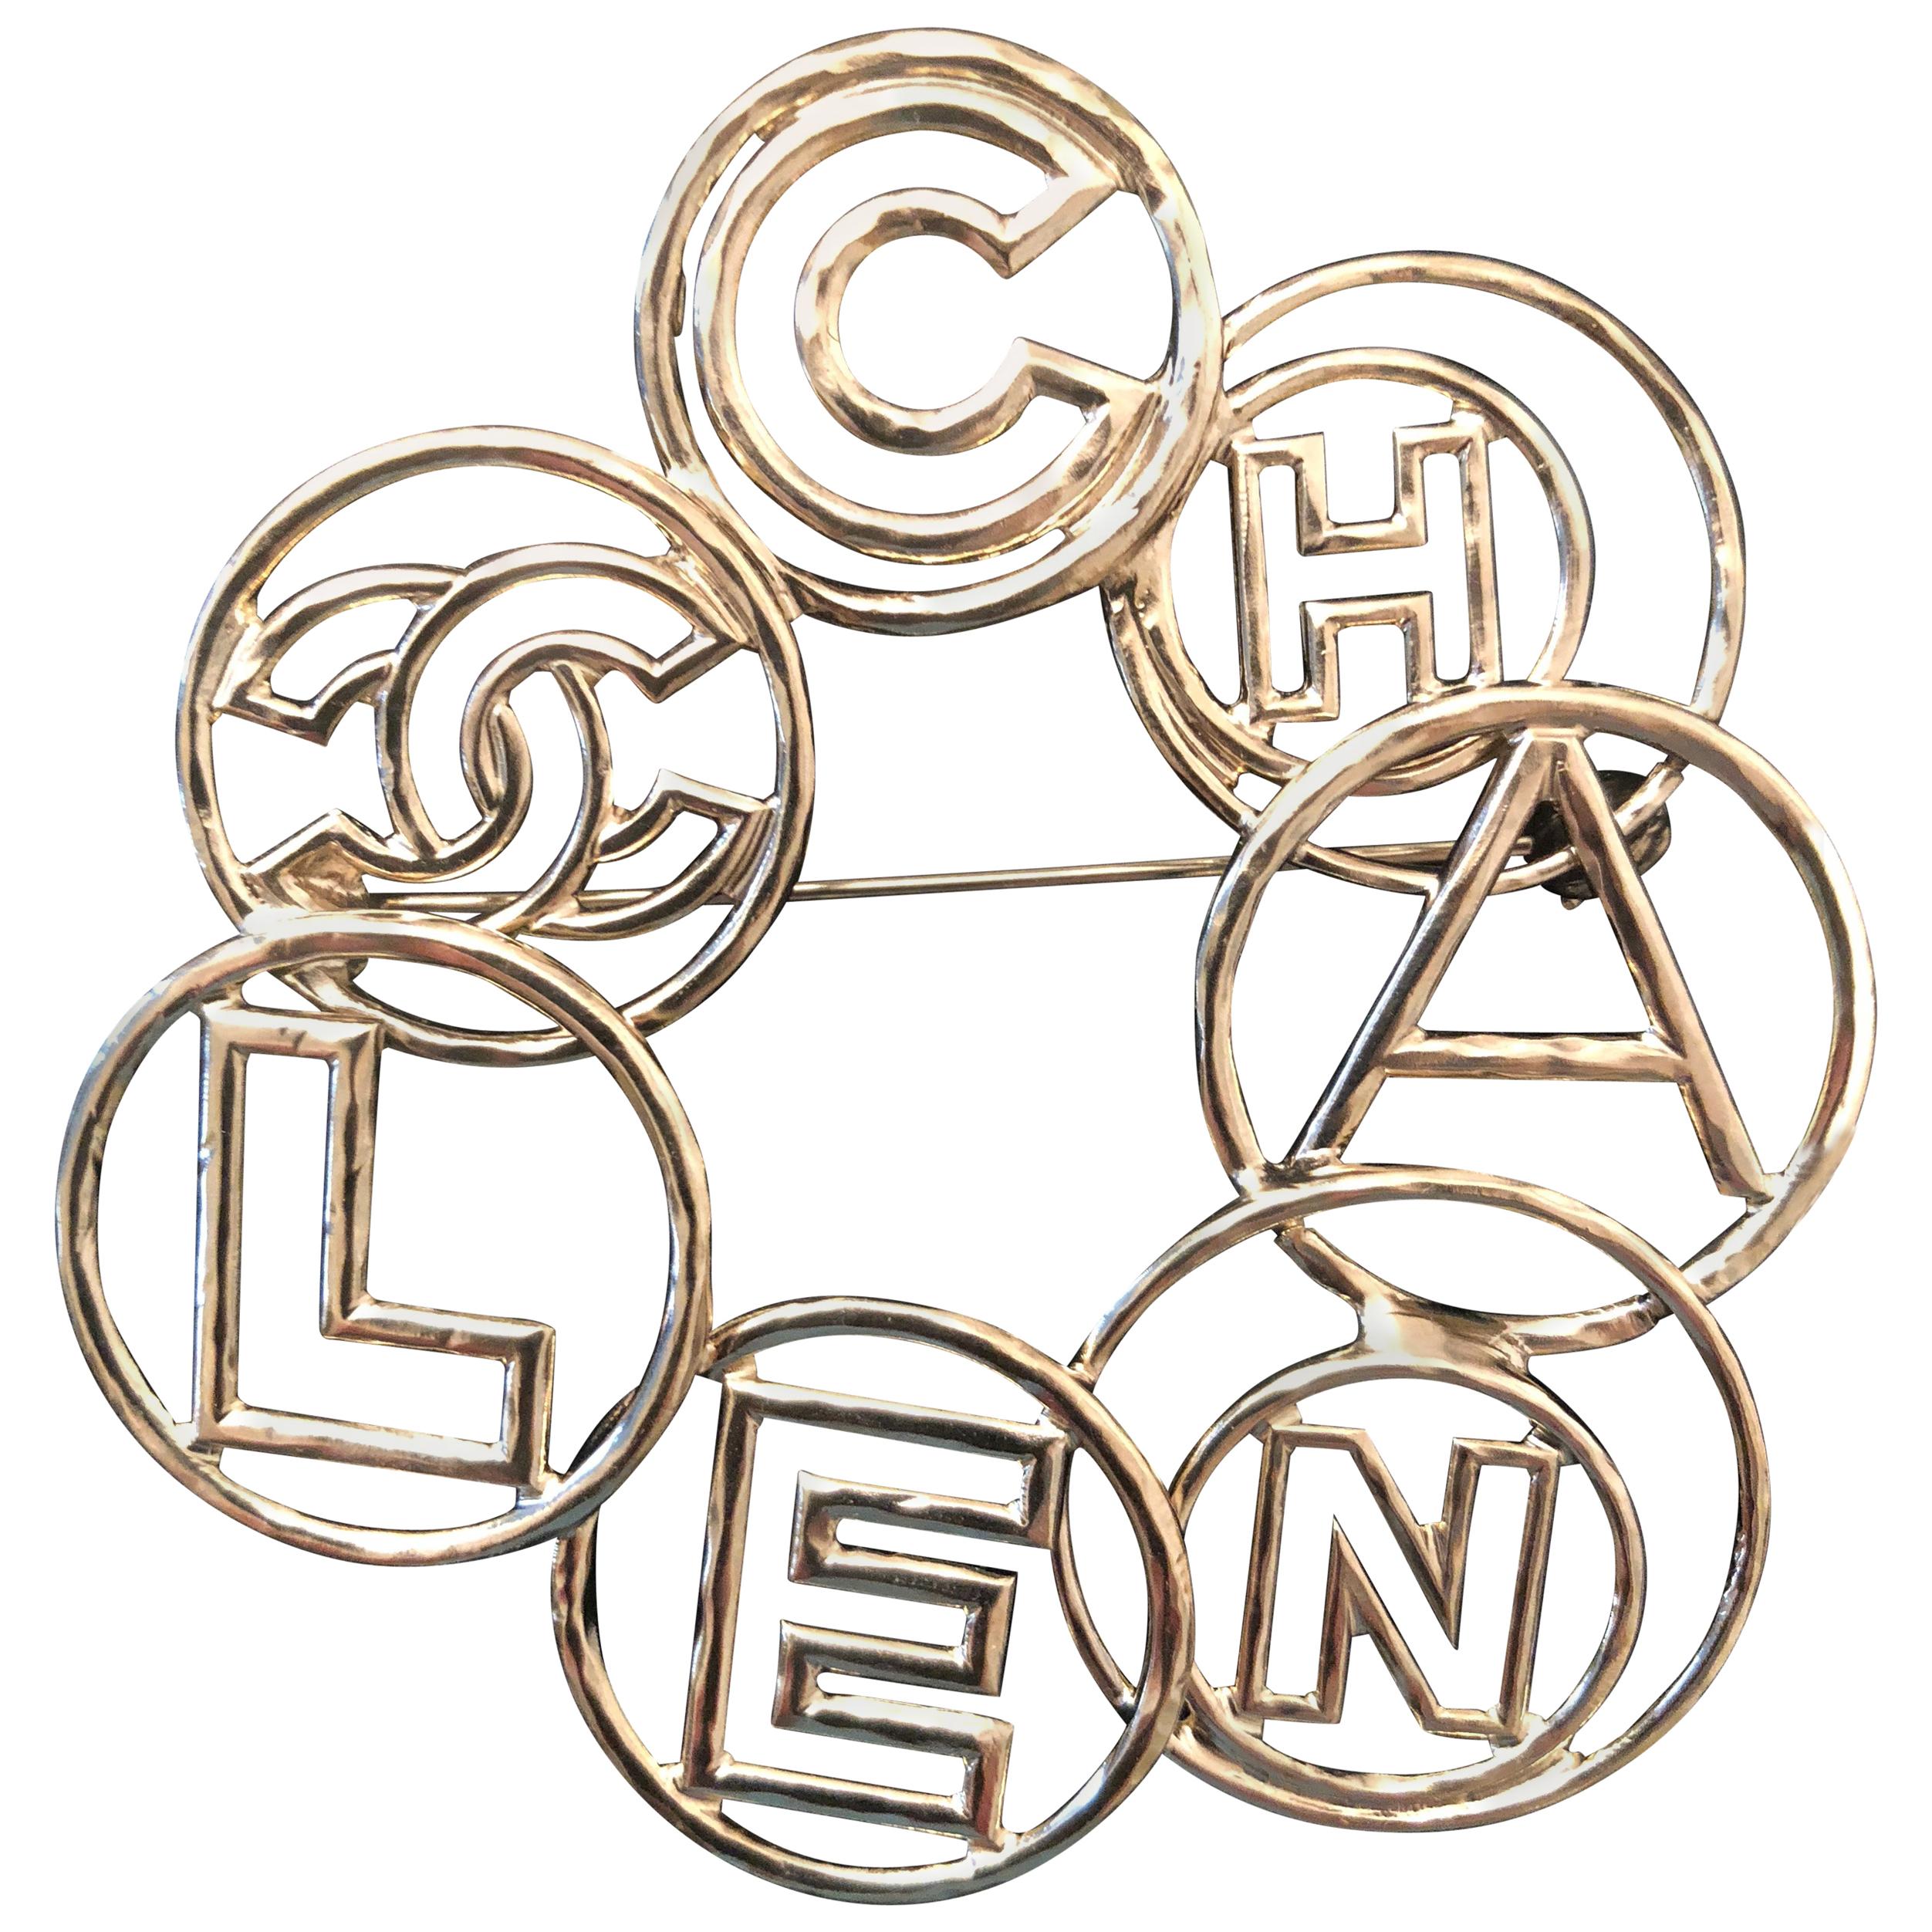 New Chanel Brooch/Pin Gold Tone